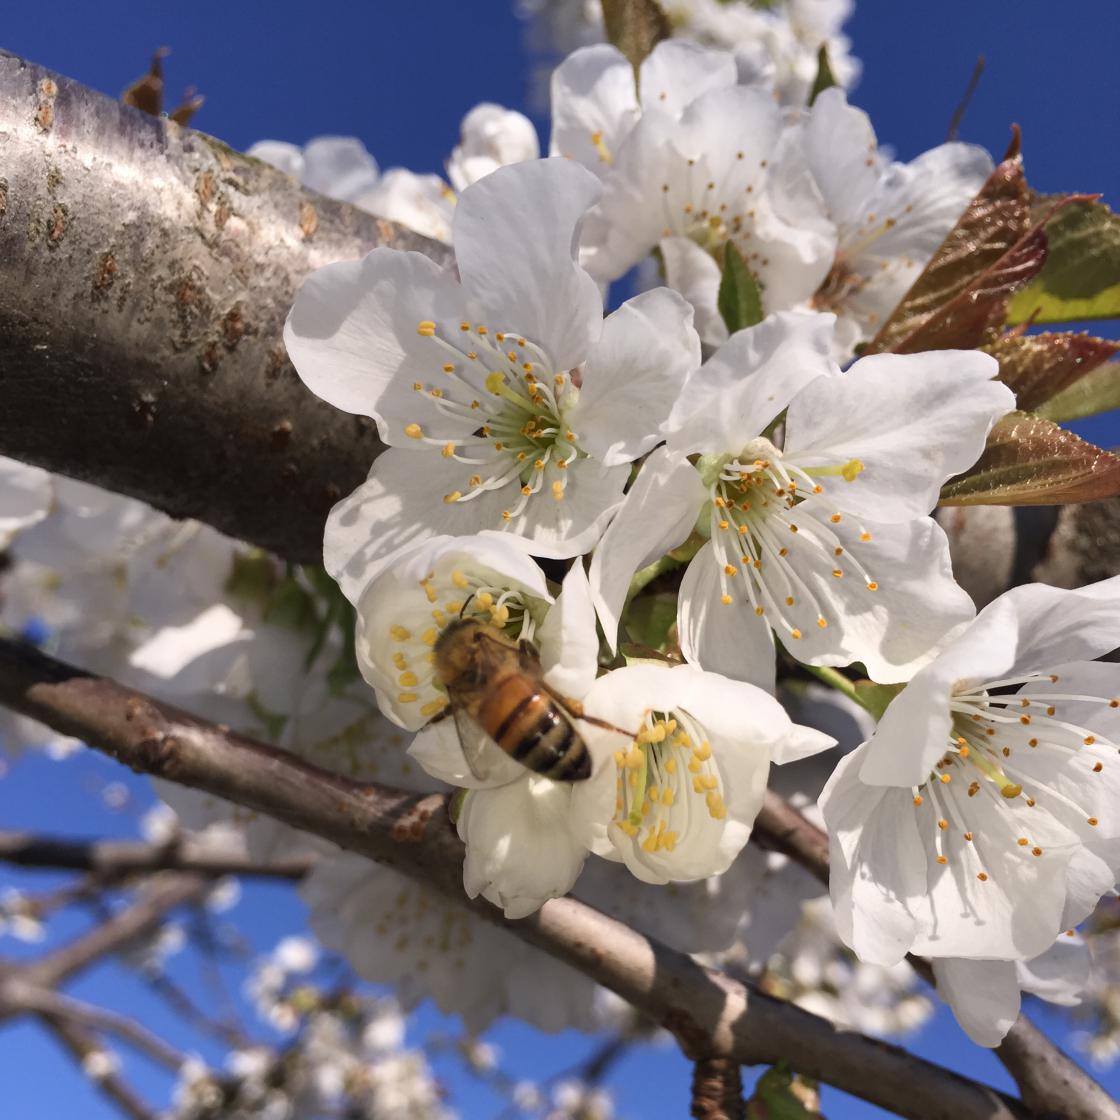 Apicoltura Mori bee and cherry blossom - online sale of honey and organic productsBee and cherry blossom